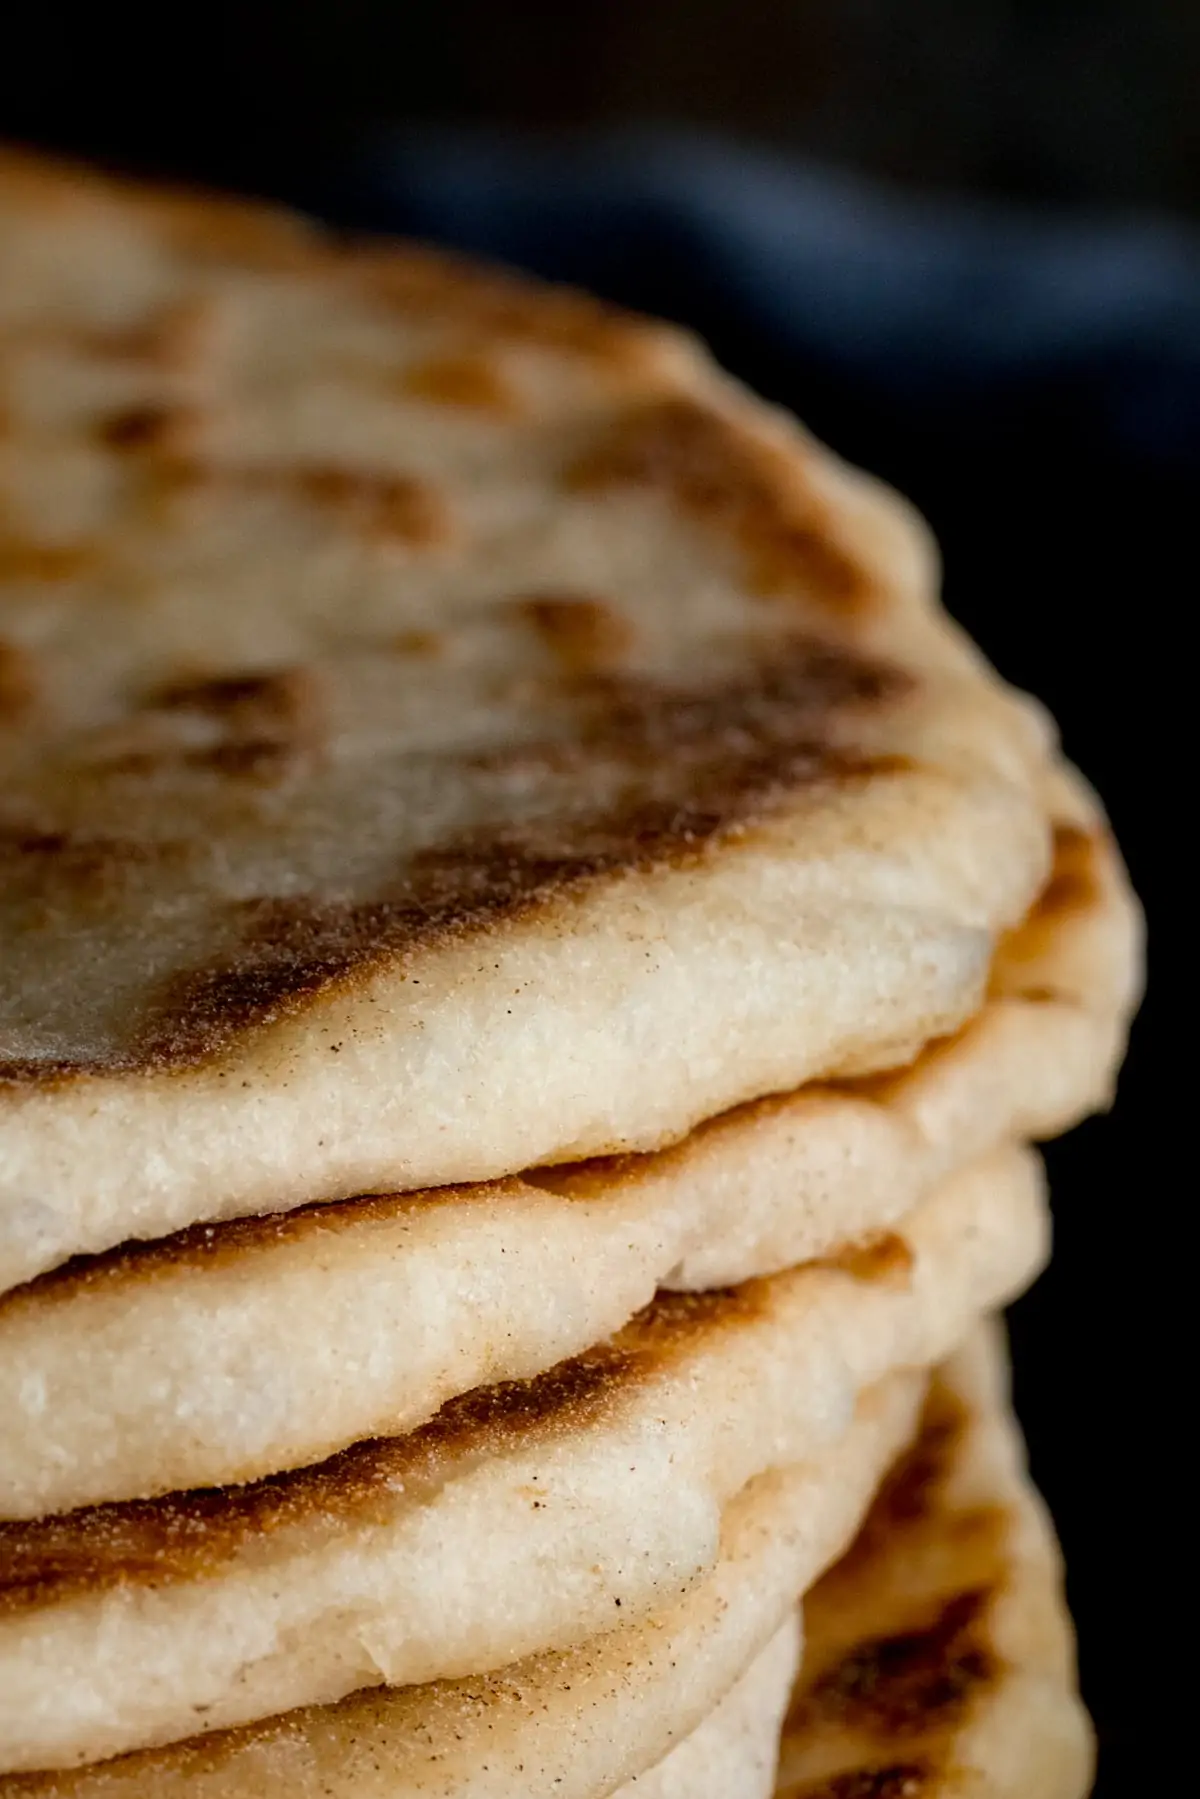 Close up of the edge of a stack of flatbreads, against a dark background.